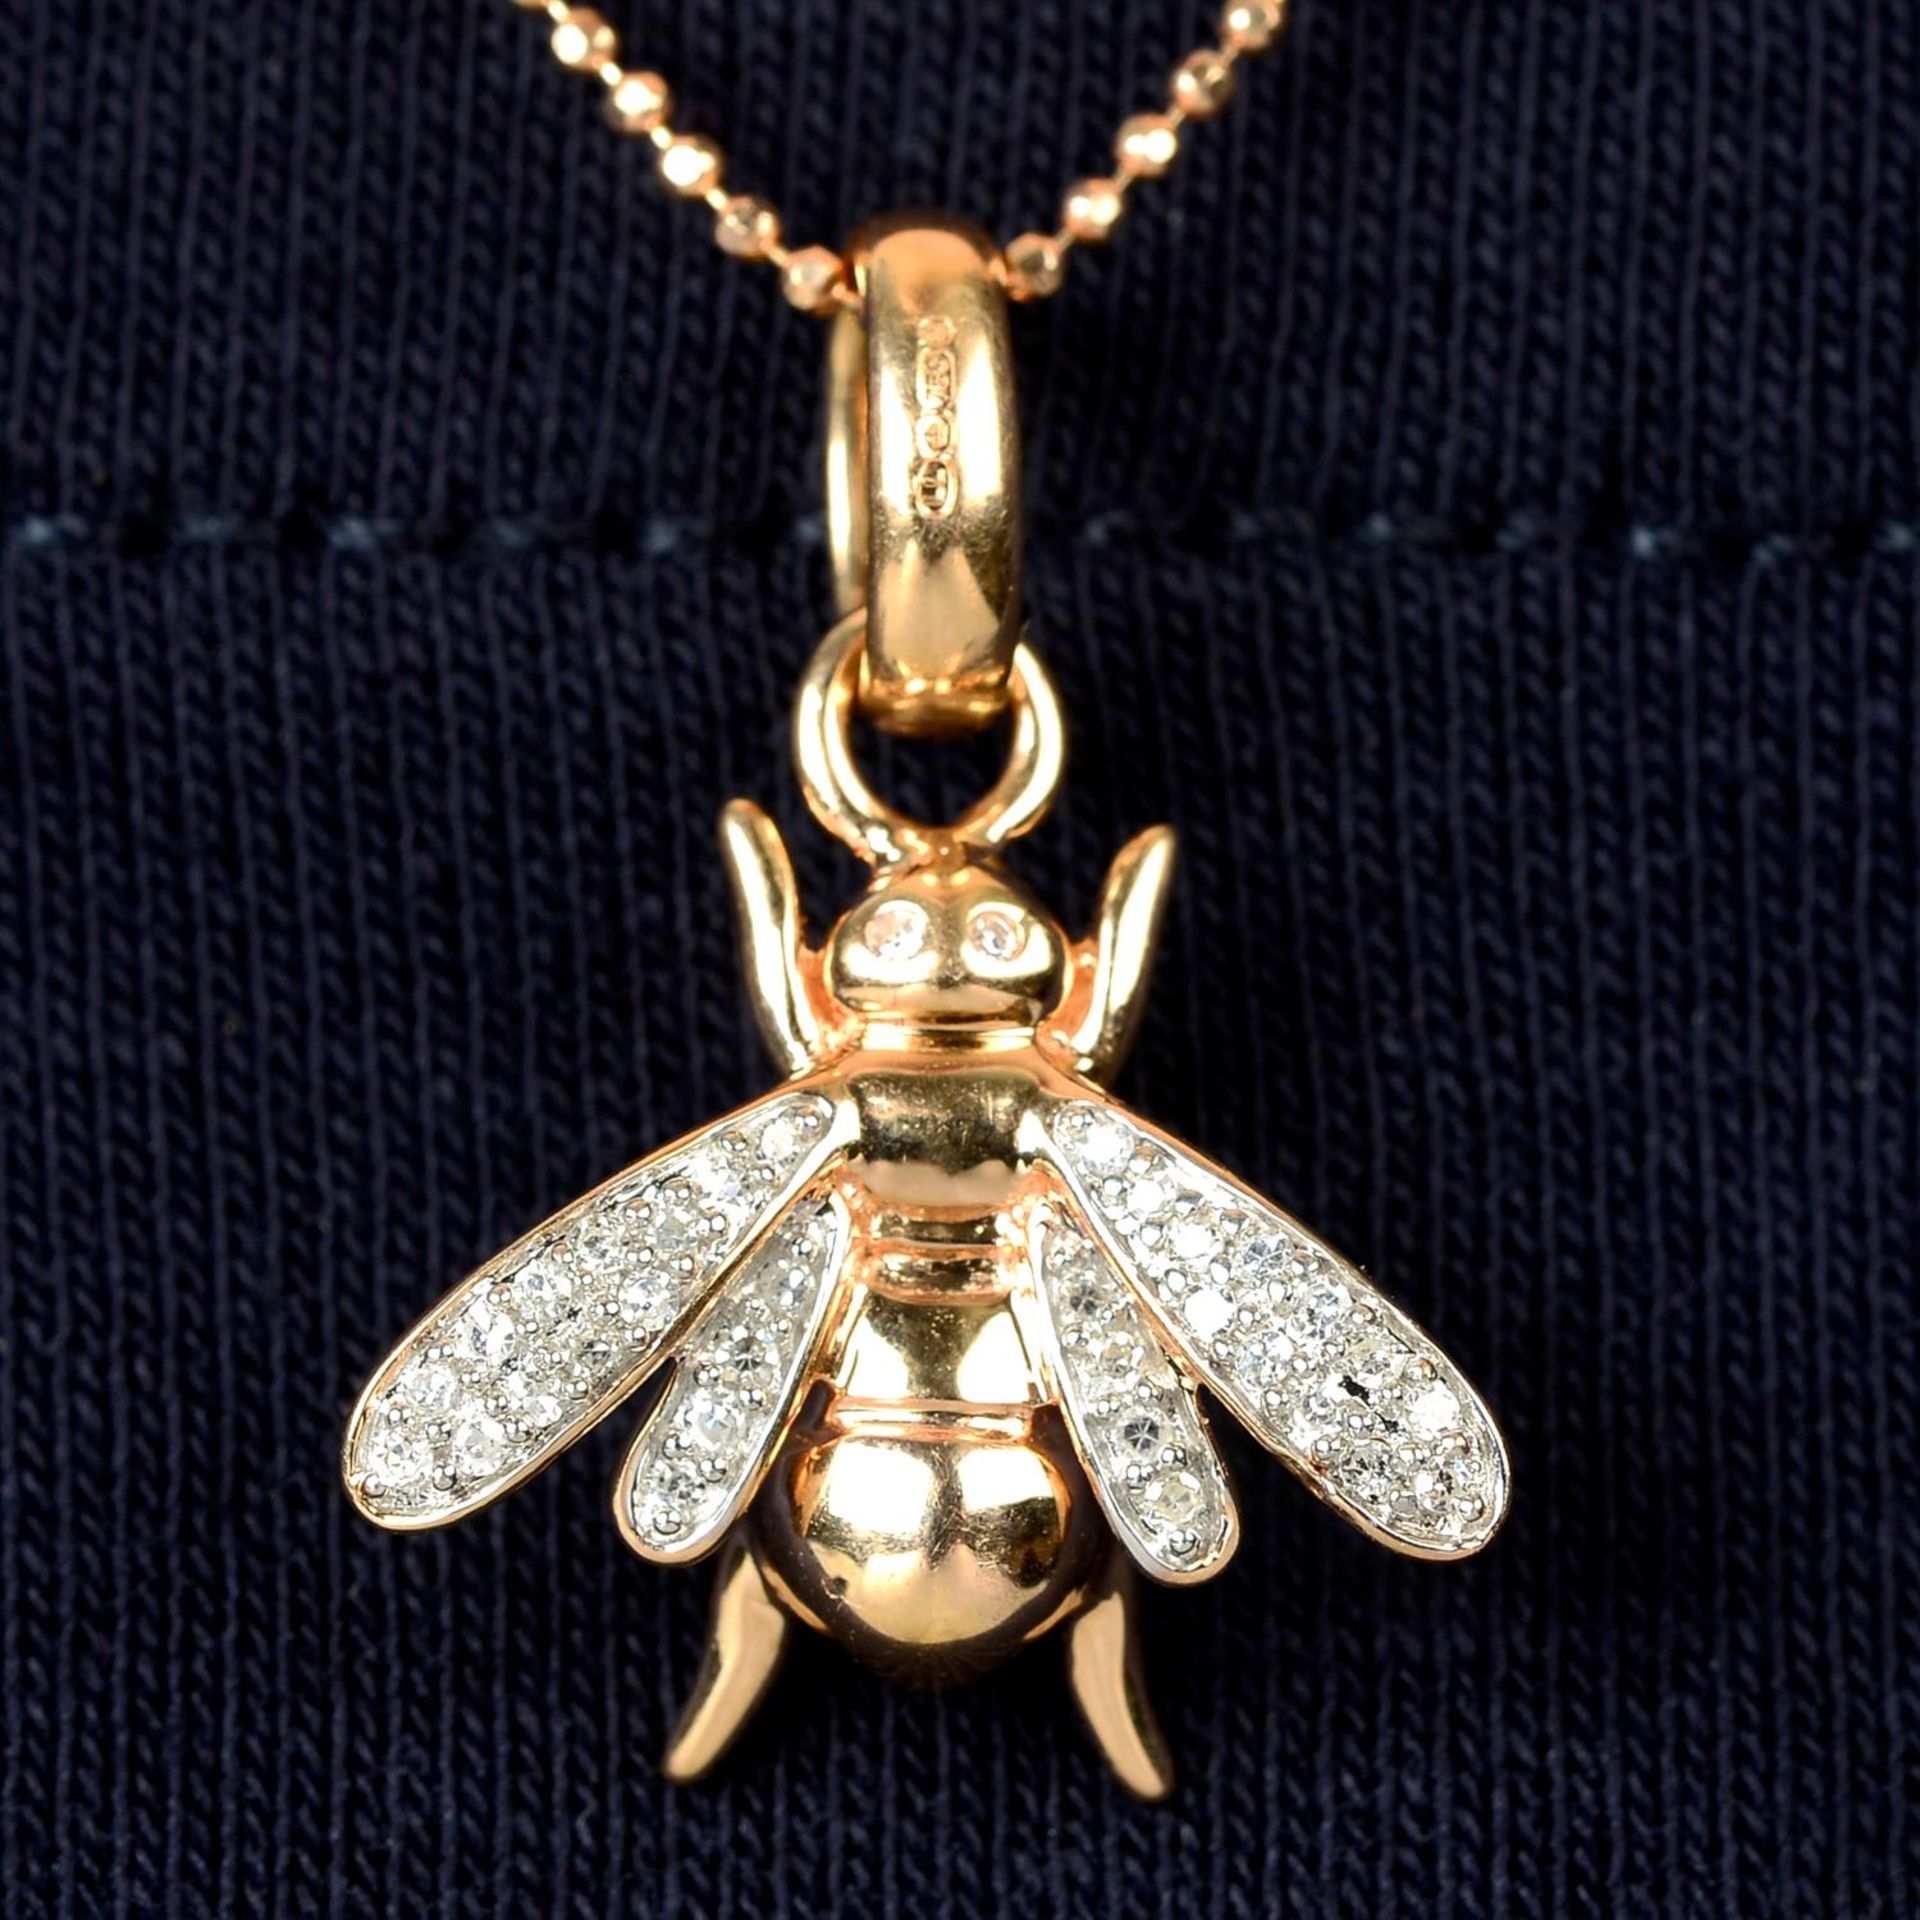 An 18ct gold diamond honey bee pendant, with chain, by Links of London.